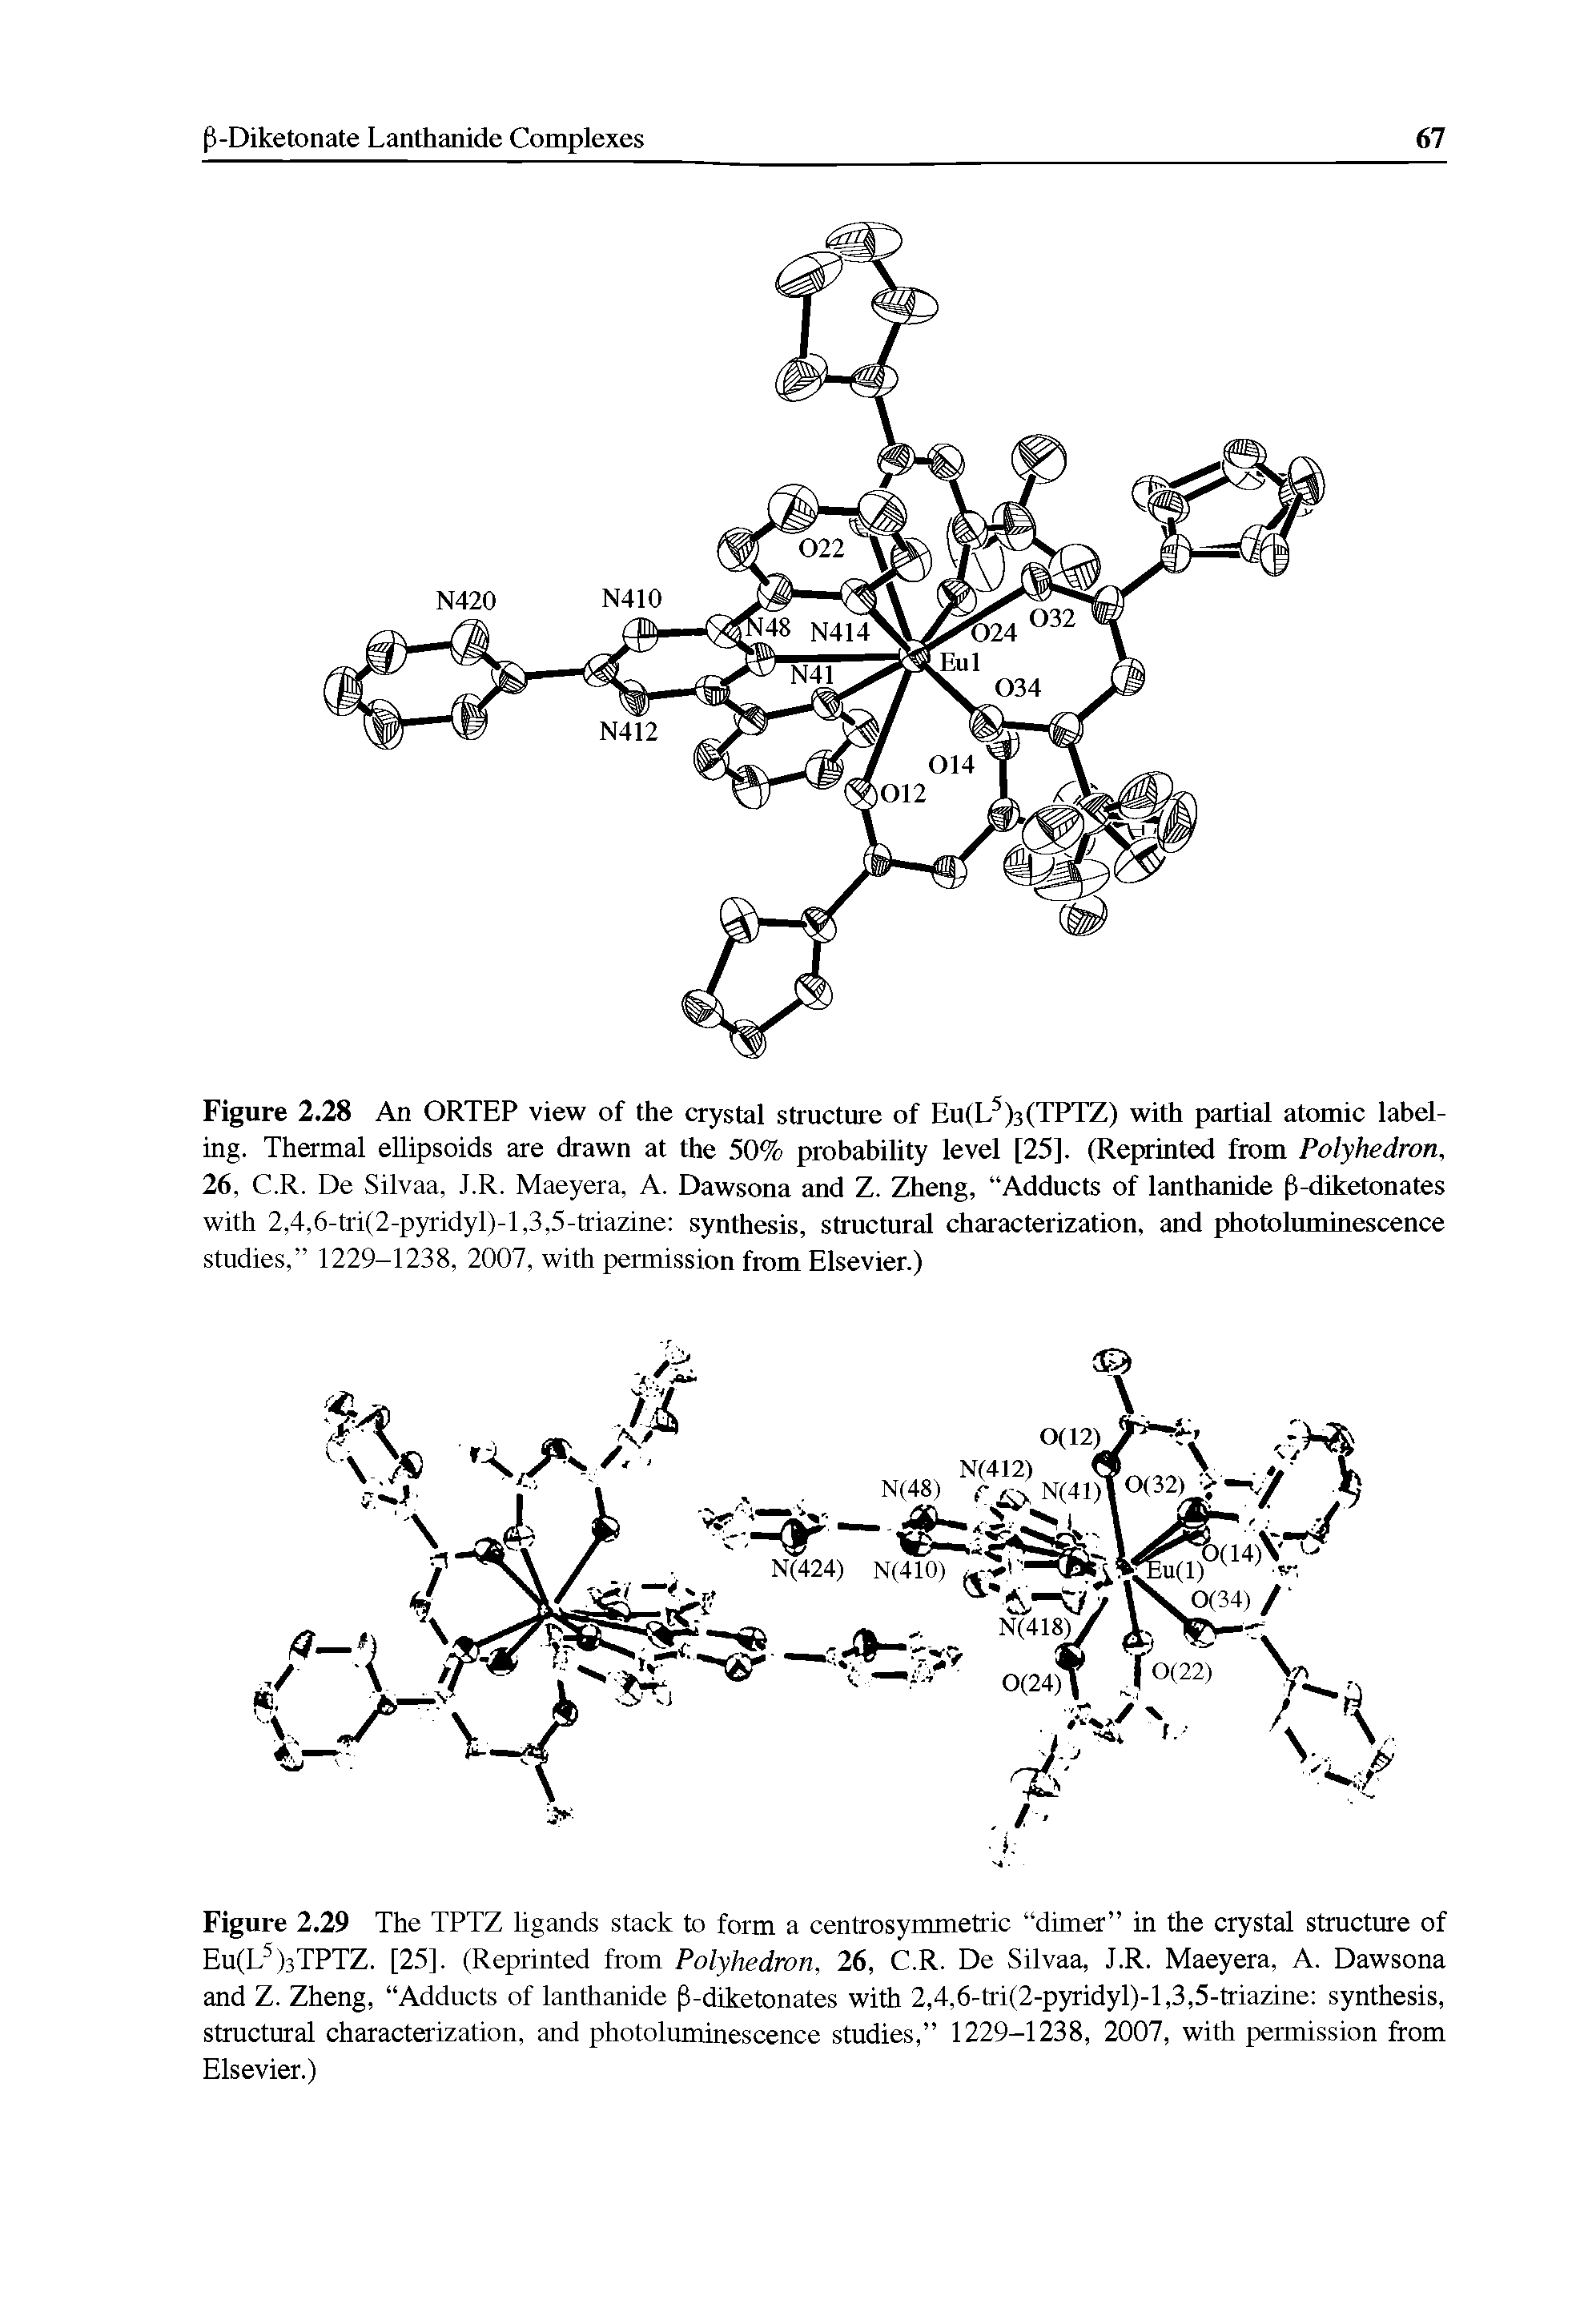 Figure 2.28 An ORTEP view of the crystal structure of Eu(L )3(TPTZ) with partial atomic labeling. Thermal ellipsoids are drawn at the 50% probability level [25]. (Reprinted from Polyhedron, 26, C.R. De Silvaa, J.R. Maeyera, A. Dawsona and Z. Zheng, Adducts of lanthanide [l-diketonates with 2,4,6-tri(2-pyridyl)-l,3,5-triazine synthesis, structural characterization, and photoluminescence studies, 1229-1238, 2007, with permission from Elsevier.)...